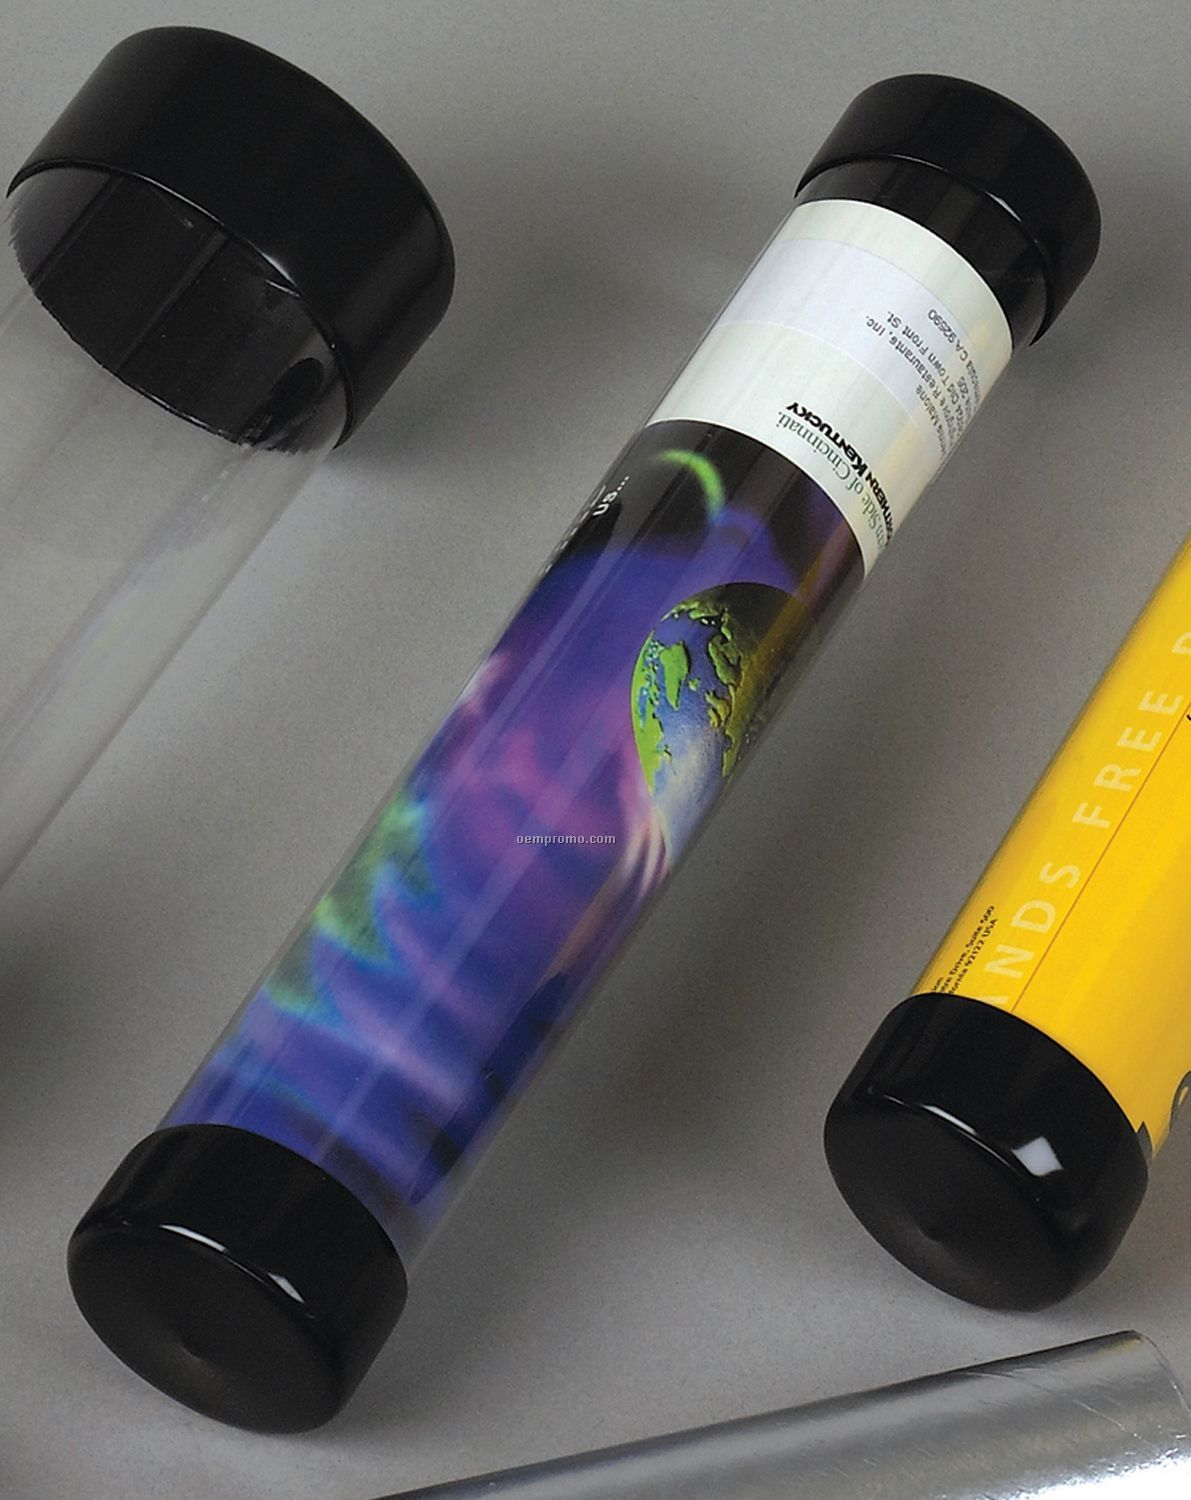 Clear Mailing Tube